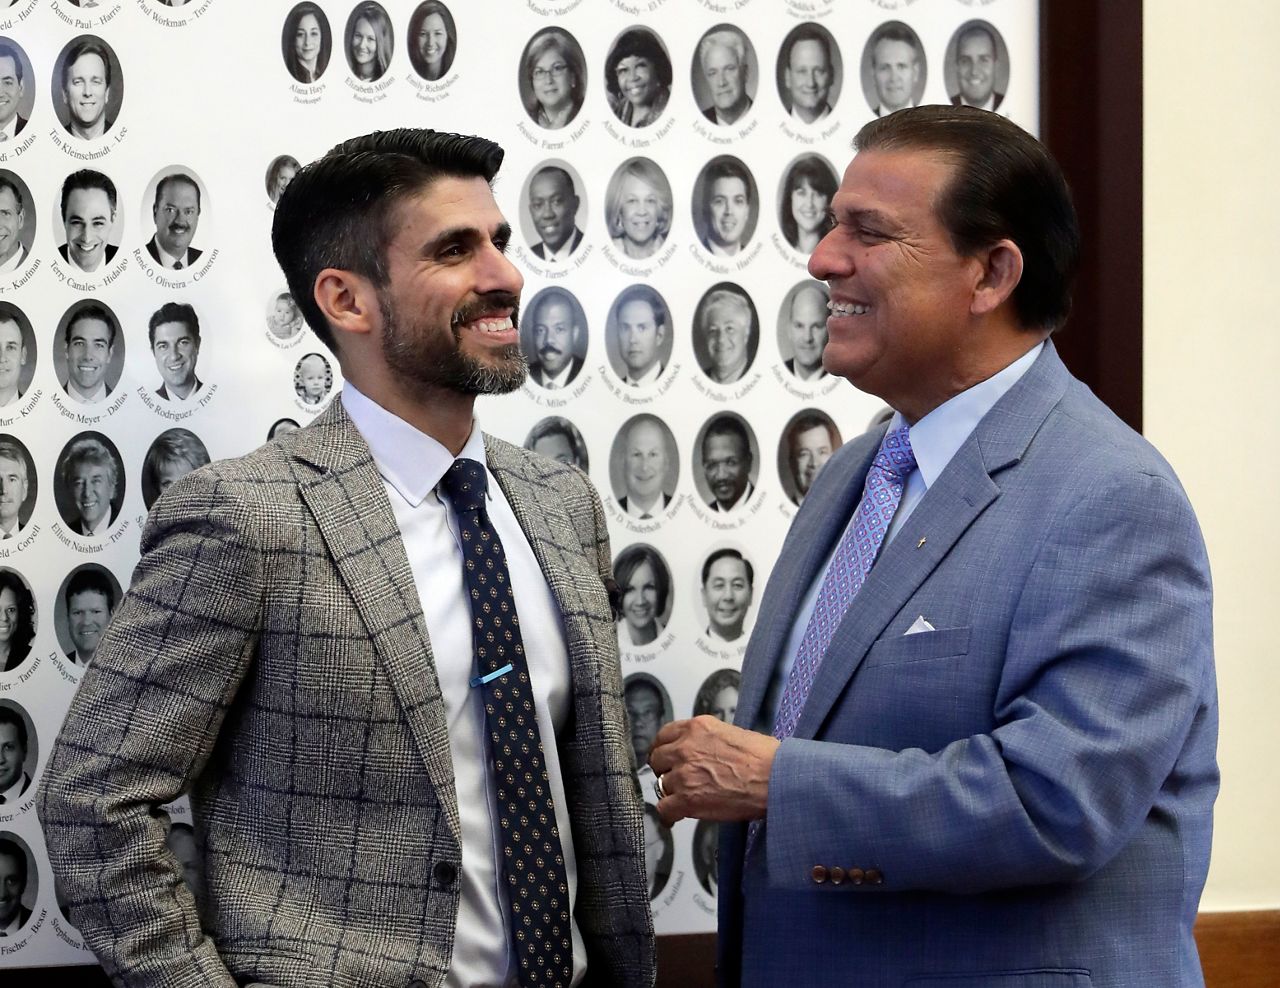 Texas Rep. Eddie Lucio III, D-Brownsville, left, visits with his father Texas Sen. Eddie Lucia Jr., D-Brownsville, right, in the House Chamber, Tuesday, May 23, 2017, in Austin. (AP Photo/Eric Gay)